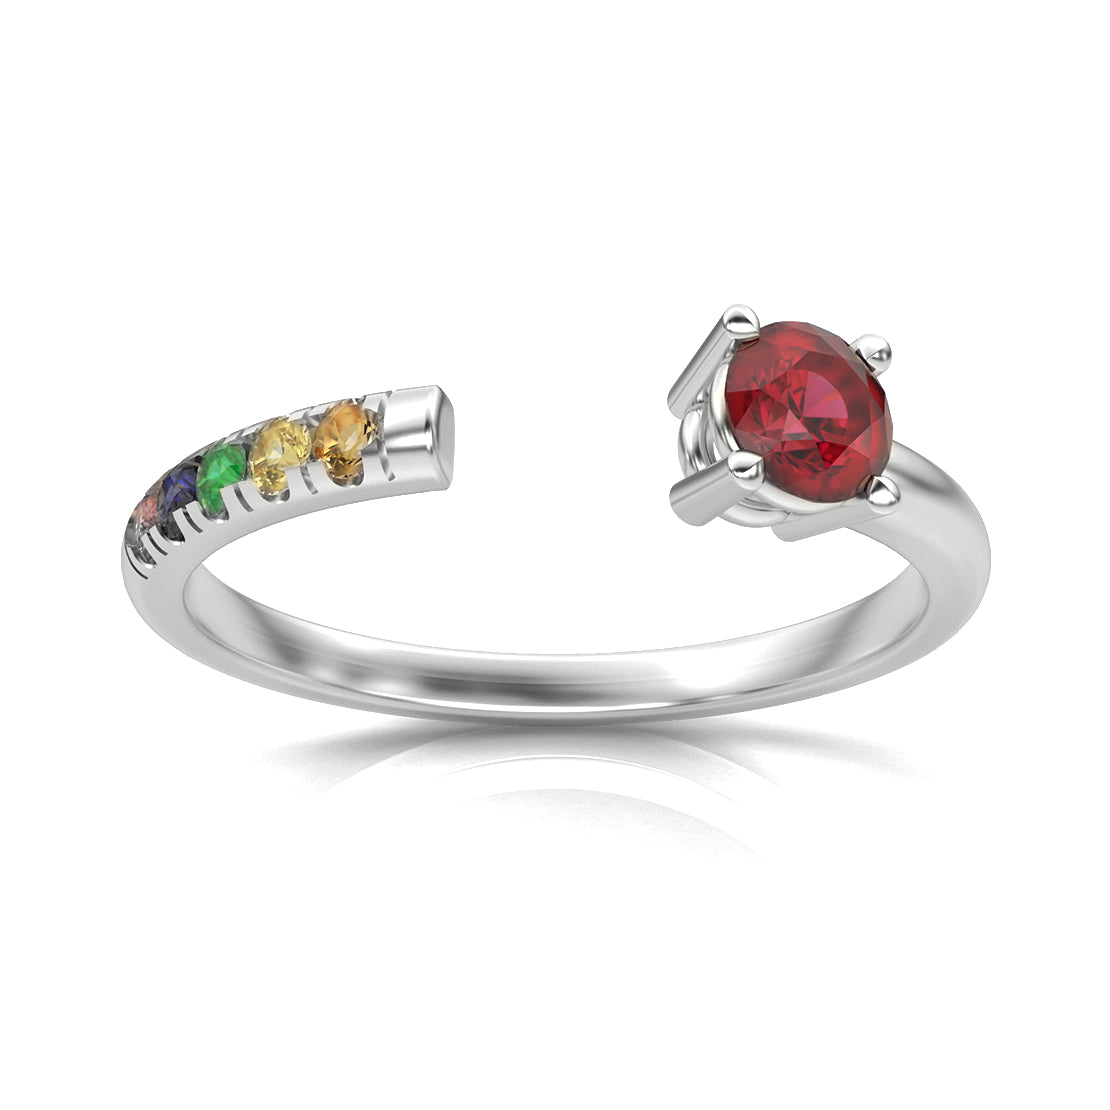 Rainbow Open Ring in 14k White Gold